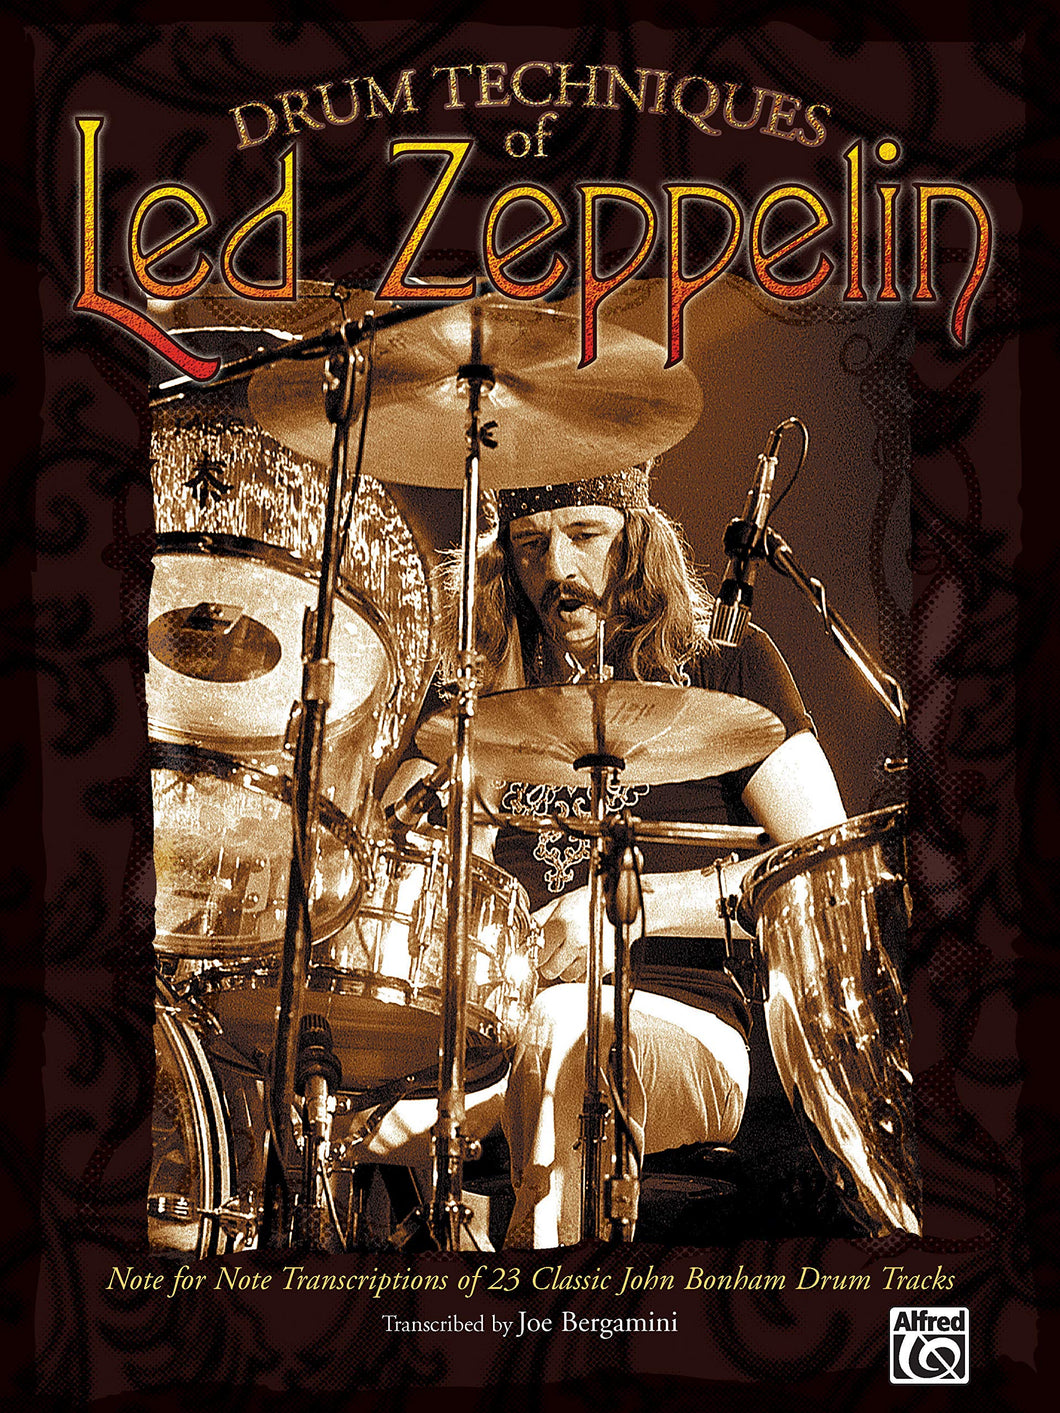 Achilles Last Stand - Led Zeppelin - Collection of Drum Transcriptions / Drum Sheet Music - Alfred Music DTLZNFNT